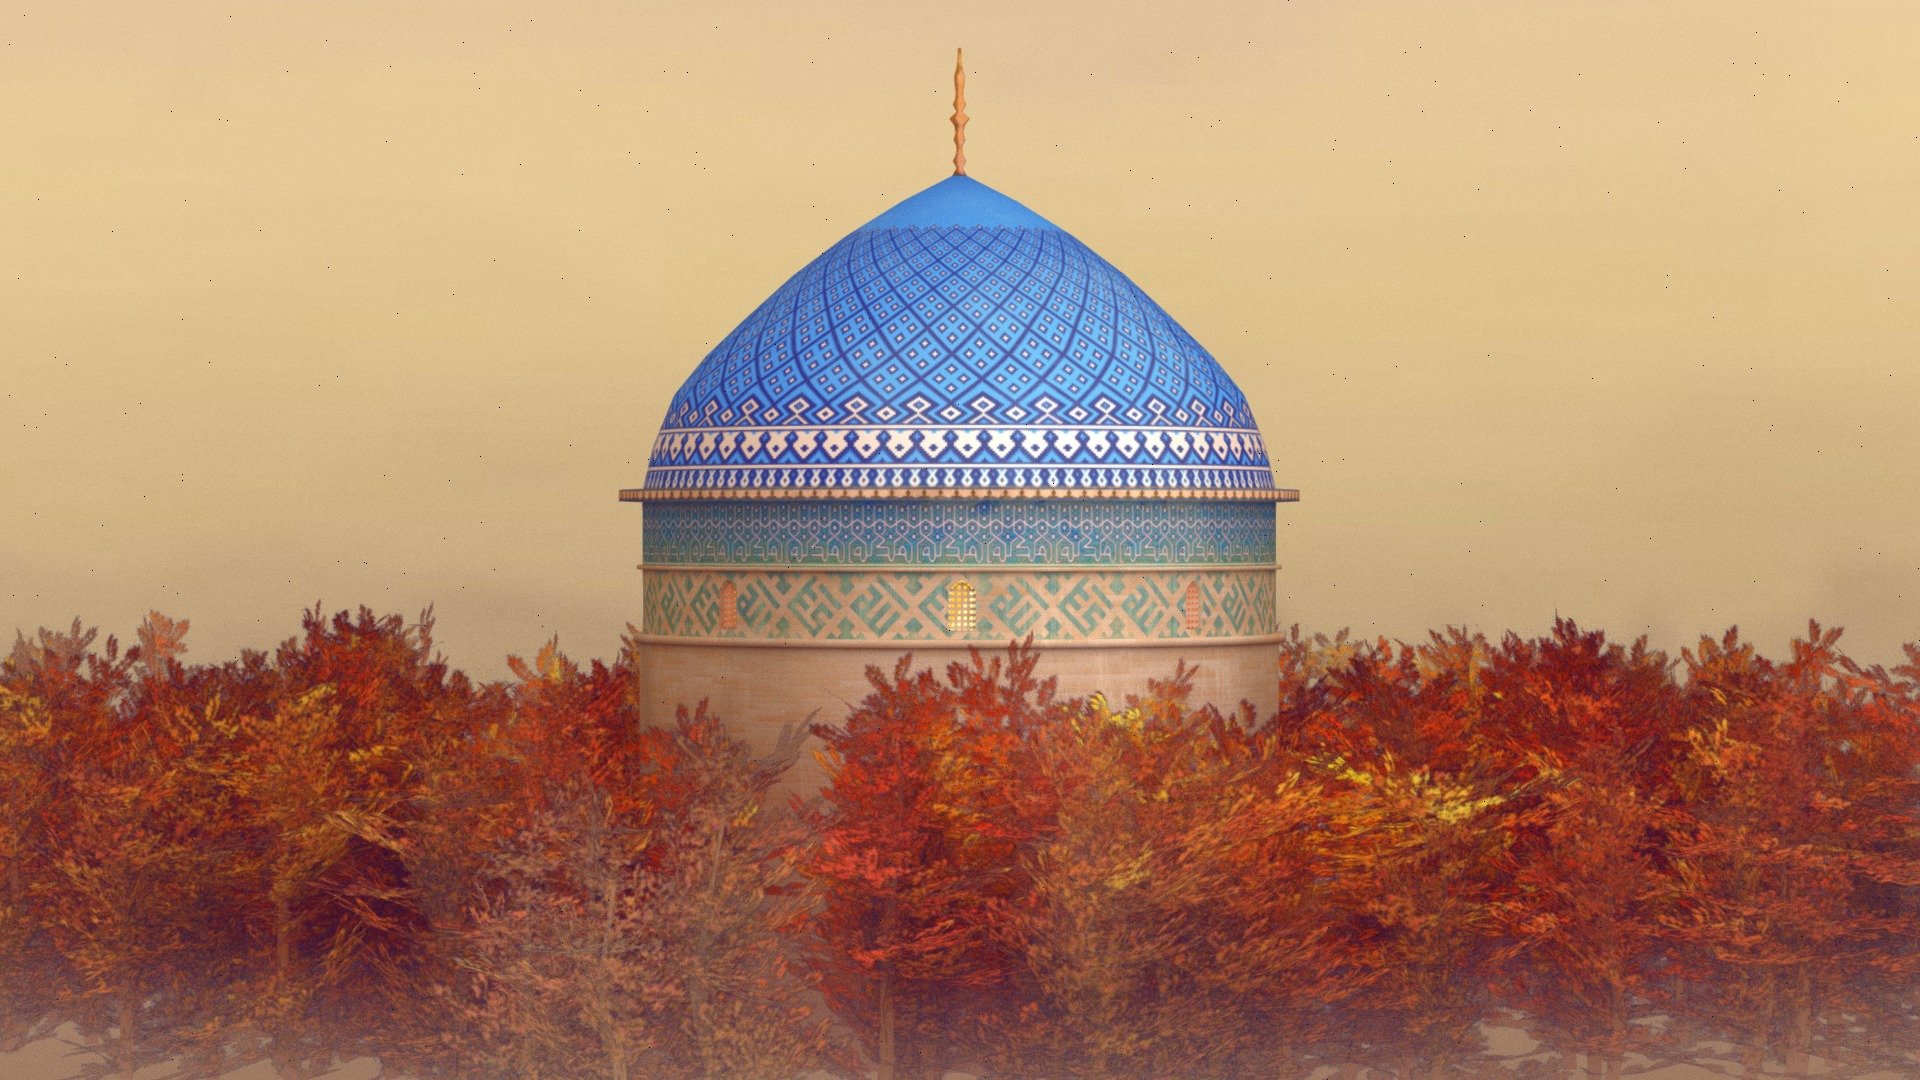 A fully procedural Islamic dome. Both the model and texture are procedurally done in geometry nodes and materials in Blender 3D. The dome design is based on the main mosque of Yazd. Yazd is a historic city in the center of Iran, and  a world UNESCO site. The city is iconic for its adobe houses and endless towers.

The tower itself has a Timurian (Tamerlane) architecture. The dome part contains a set of repeating geometrical patterns, followed by two sections of caligraphy. The upper part is knotted Kufic calligraphy, it says Mecca ( مکه), the holy city of Islam. The second row is square Kufic calligraphy, reading Allah and another word I cant read. 
You can grab the Blend file to here for your own use https://github.com/IRCSS/Procedural-Islamic-Dome-Generator - Islamic Dome - Yazd - Download Free 3D model by Shahriar Shahrabi (@shahriyarshahrabi) 3d model